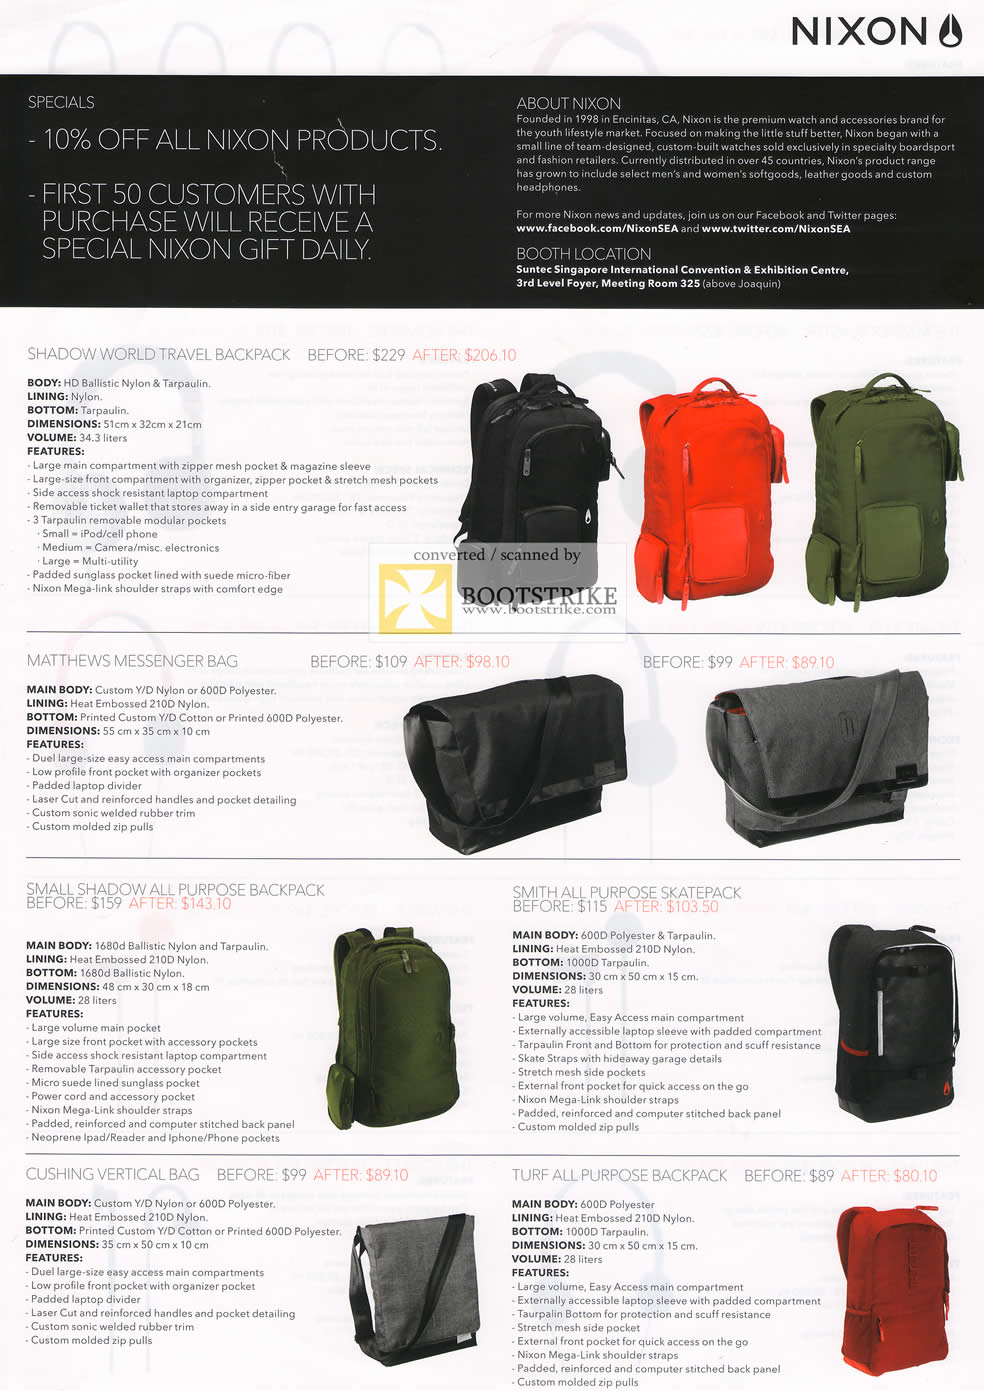 PC Show 2011 price list image brochure of EpiCentre Nixon Bags Backpack Shadow Matthews Messenger Small Smith Skatepack Cushing Vertical Turf All Purpose